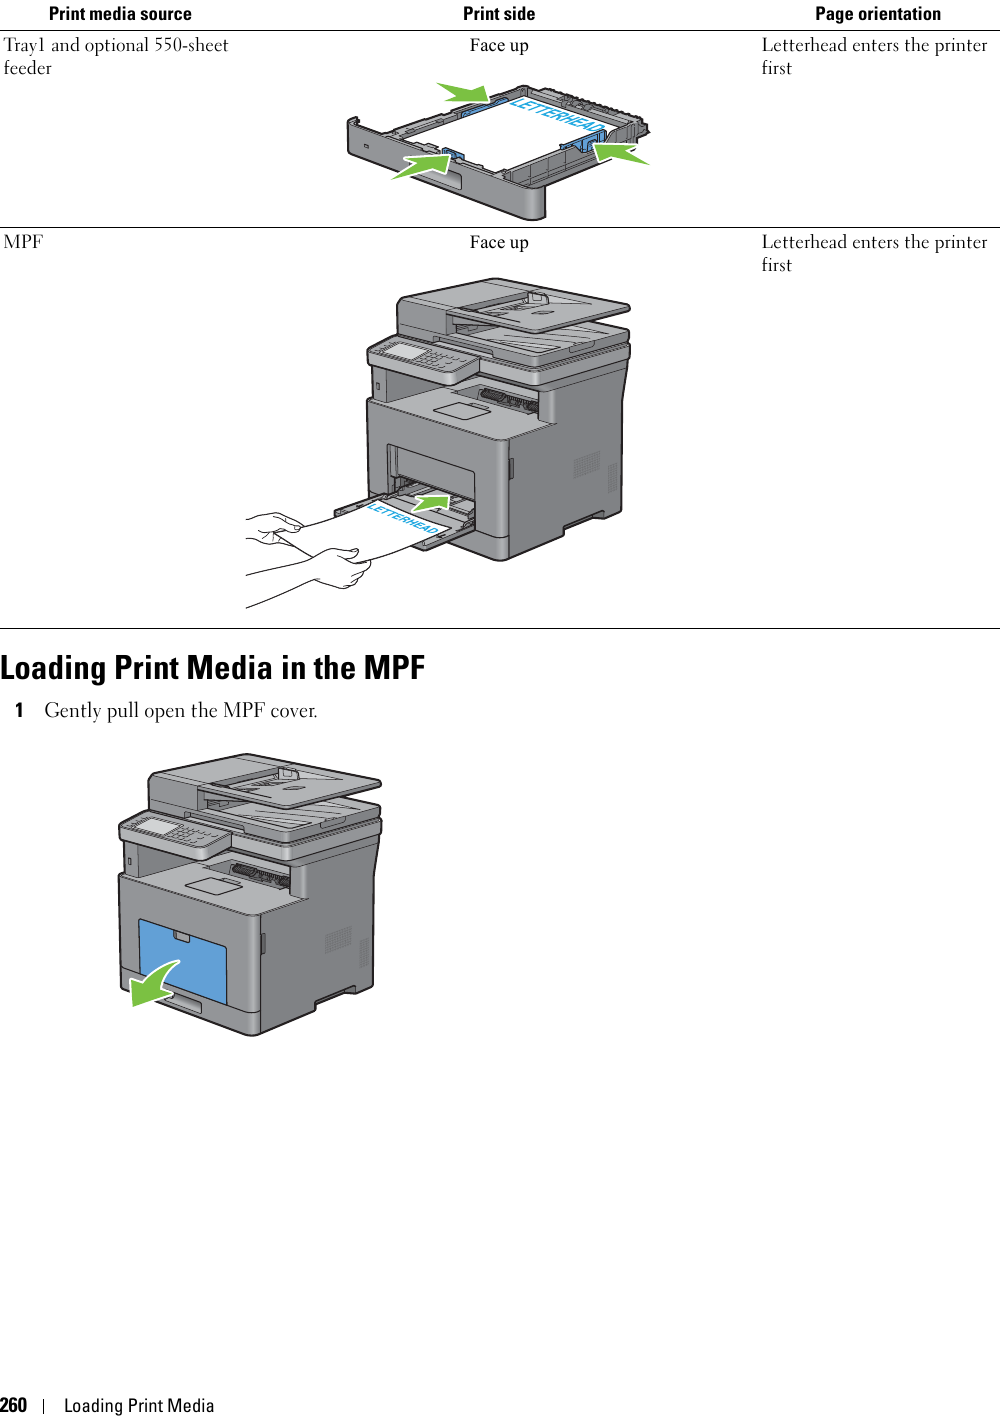 260Loading Print MediaLoading Print Media in the MPF1Gently pull open the MPF cover.Print media source Print side Page orientationTray1 and optional 550-sheet feederFace up Letterhead enters the printer firstMPF Face up Letterhead enters the printer first